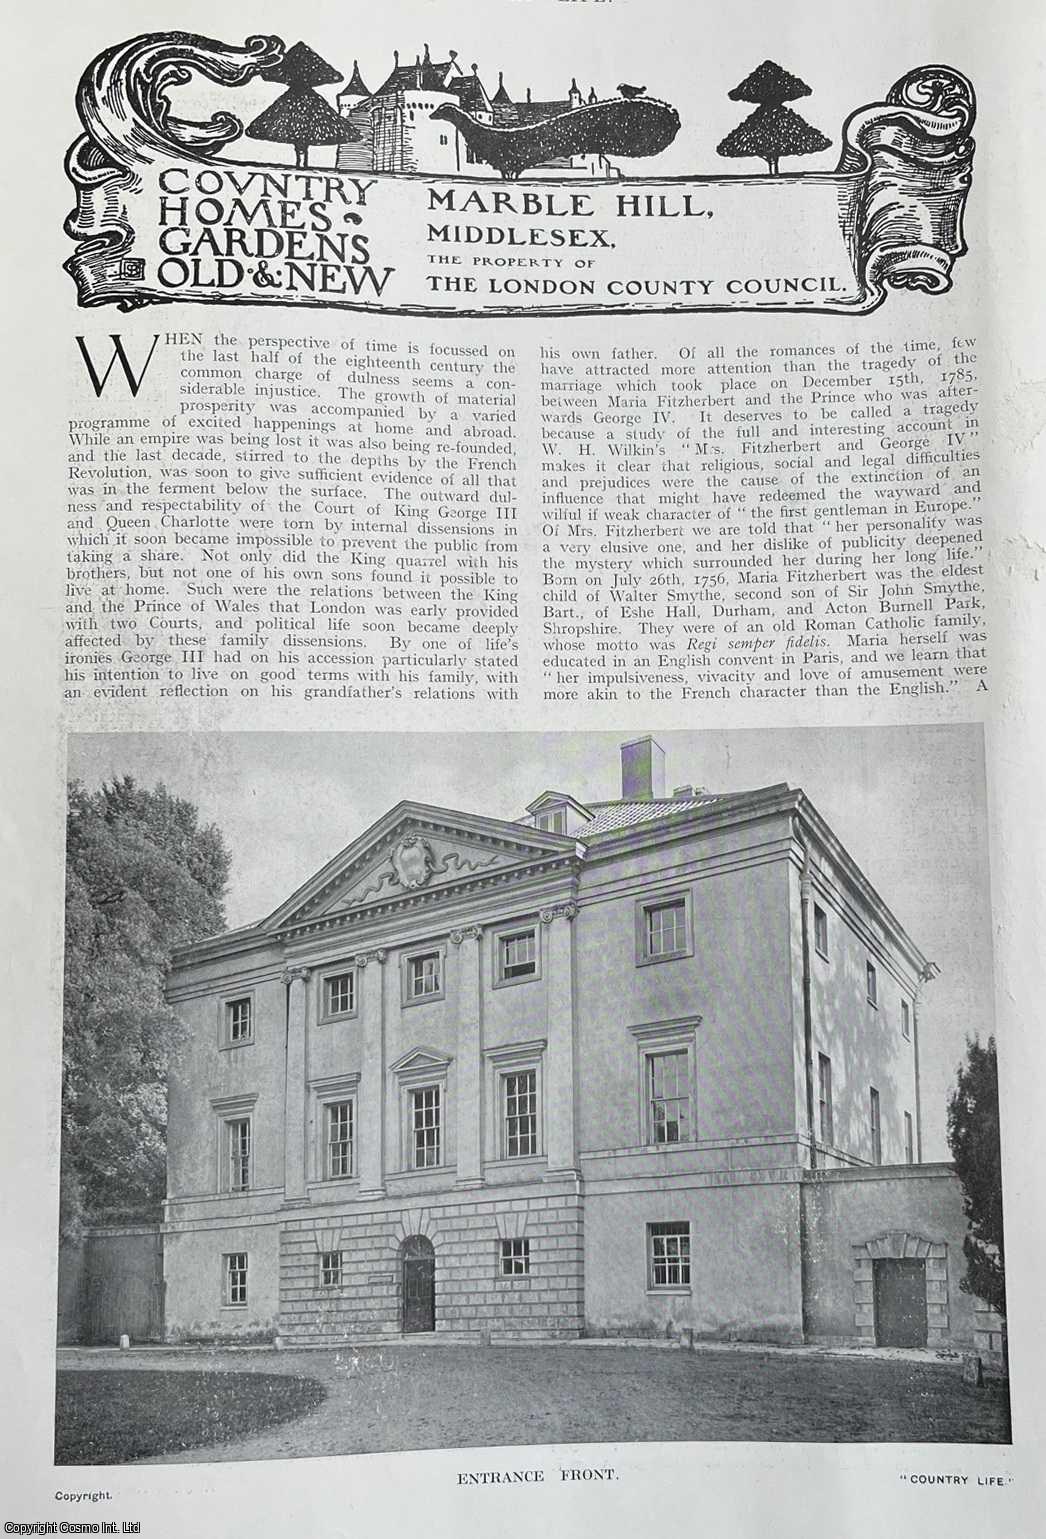 Country Life Magazine - Marble Hill, Middlesex. Several pictures and accompanying text, removed from an original issue of Country Life Magazine, 1916.